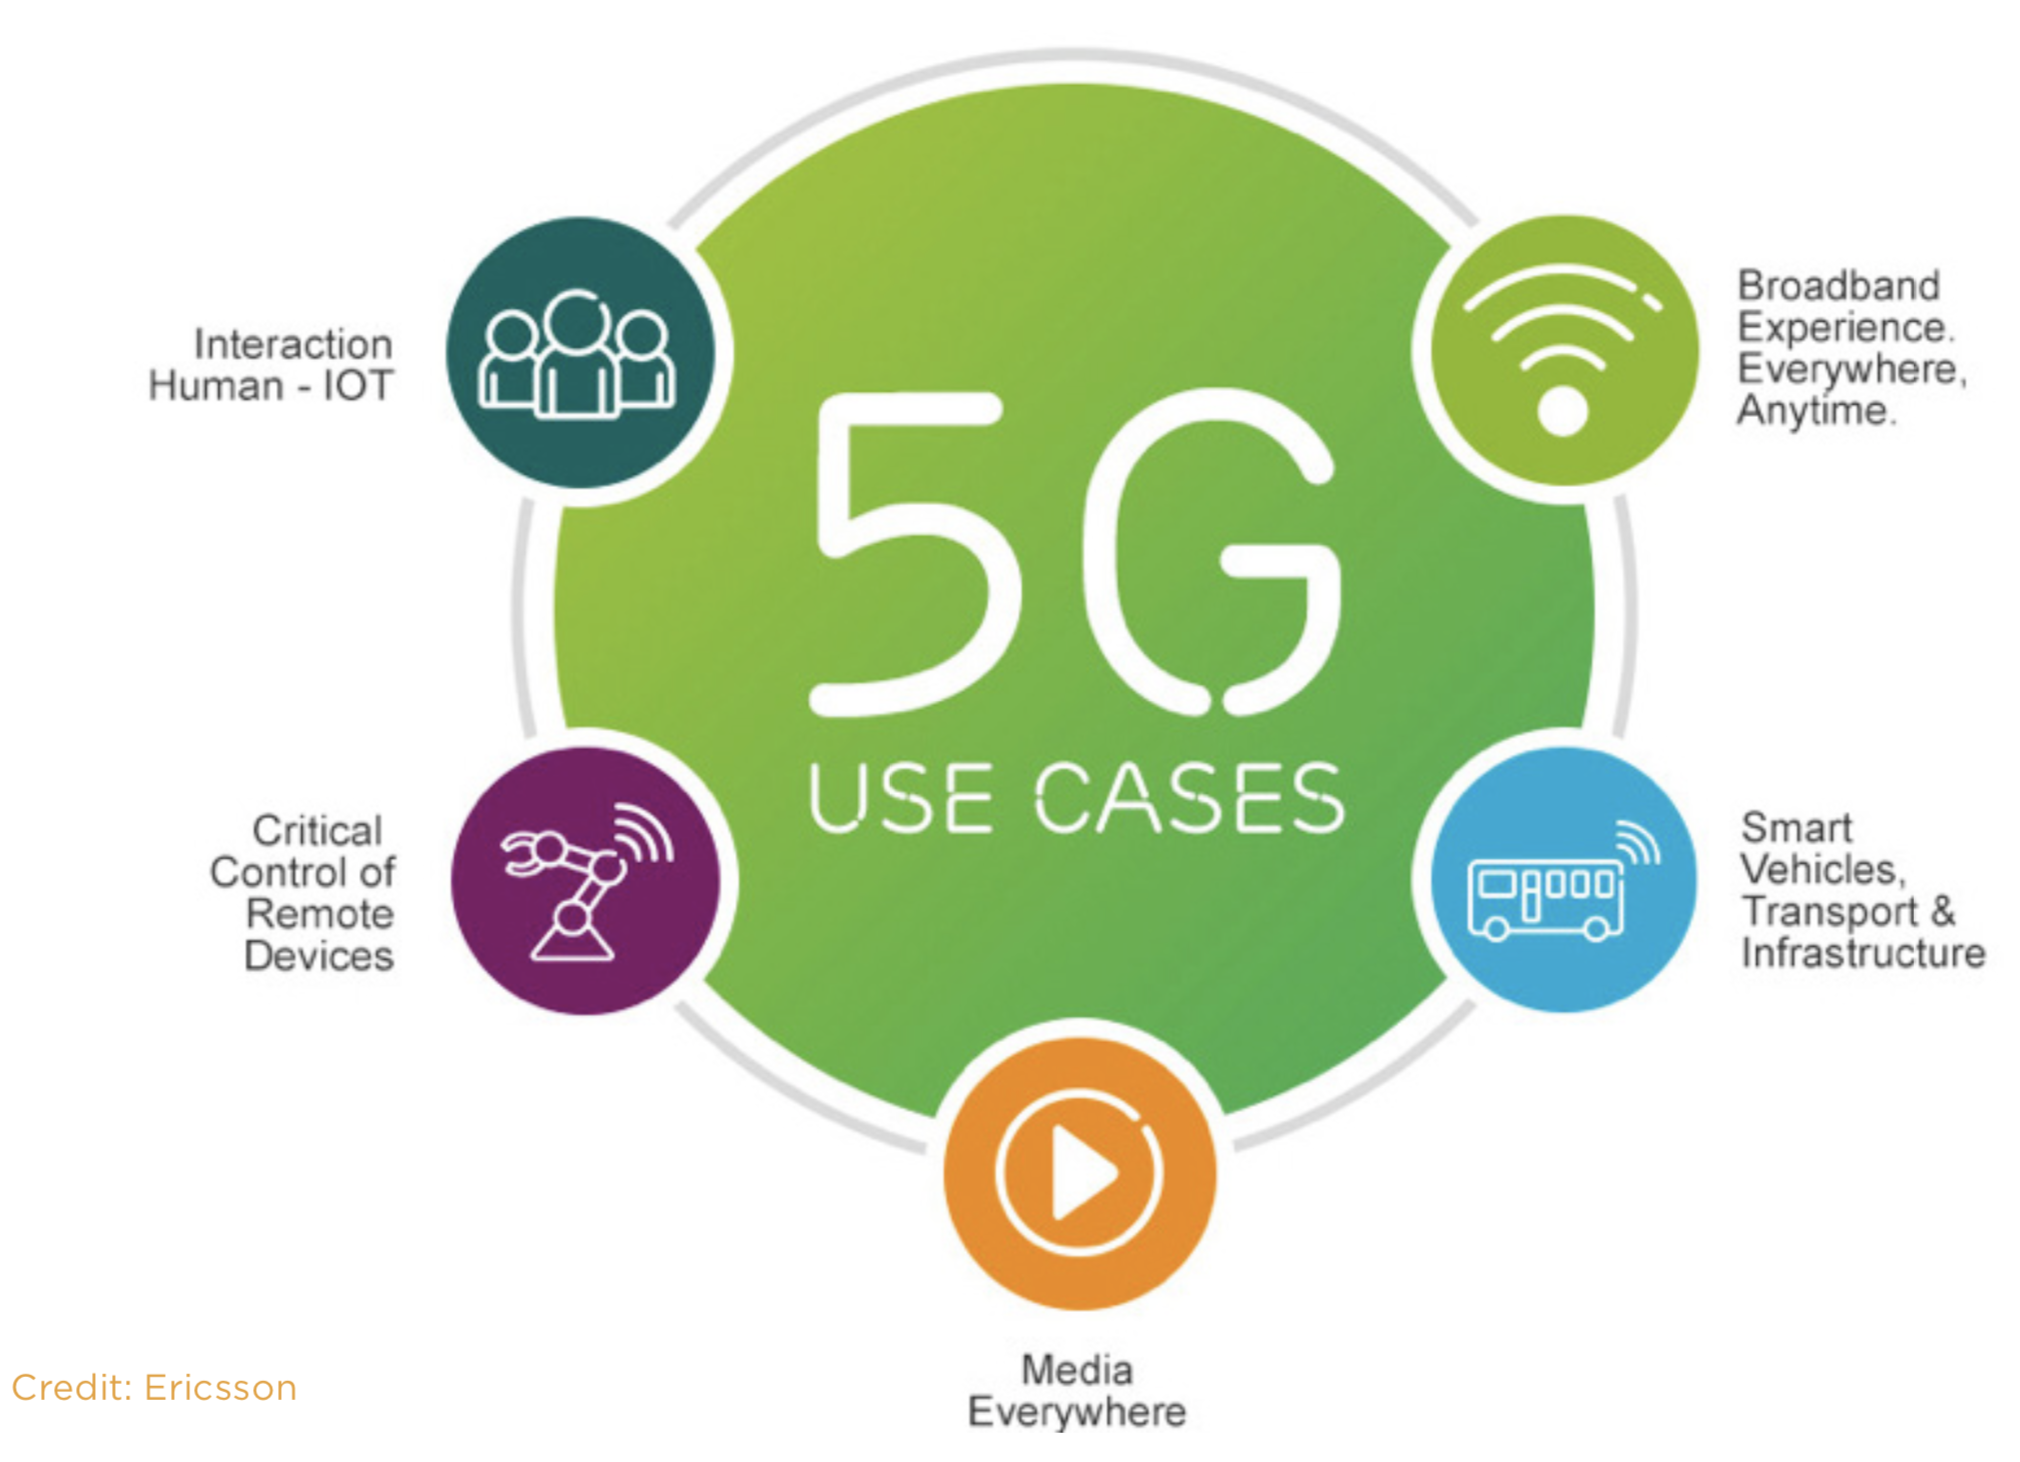 What New Services Will 5G Enable